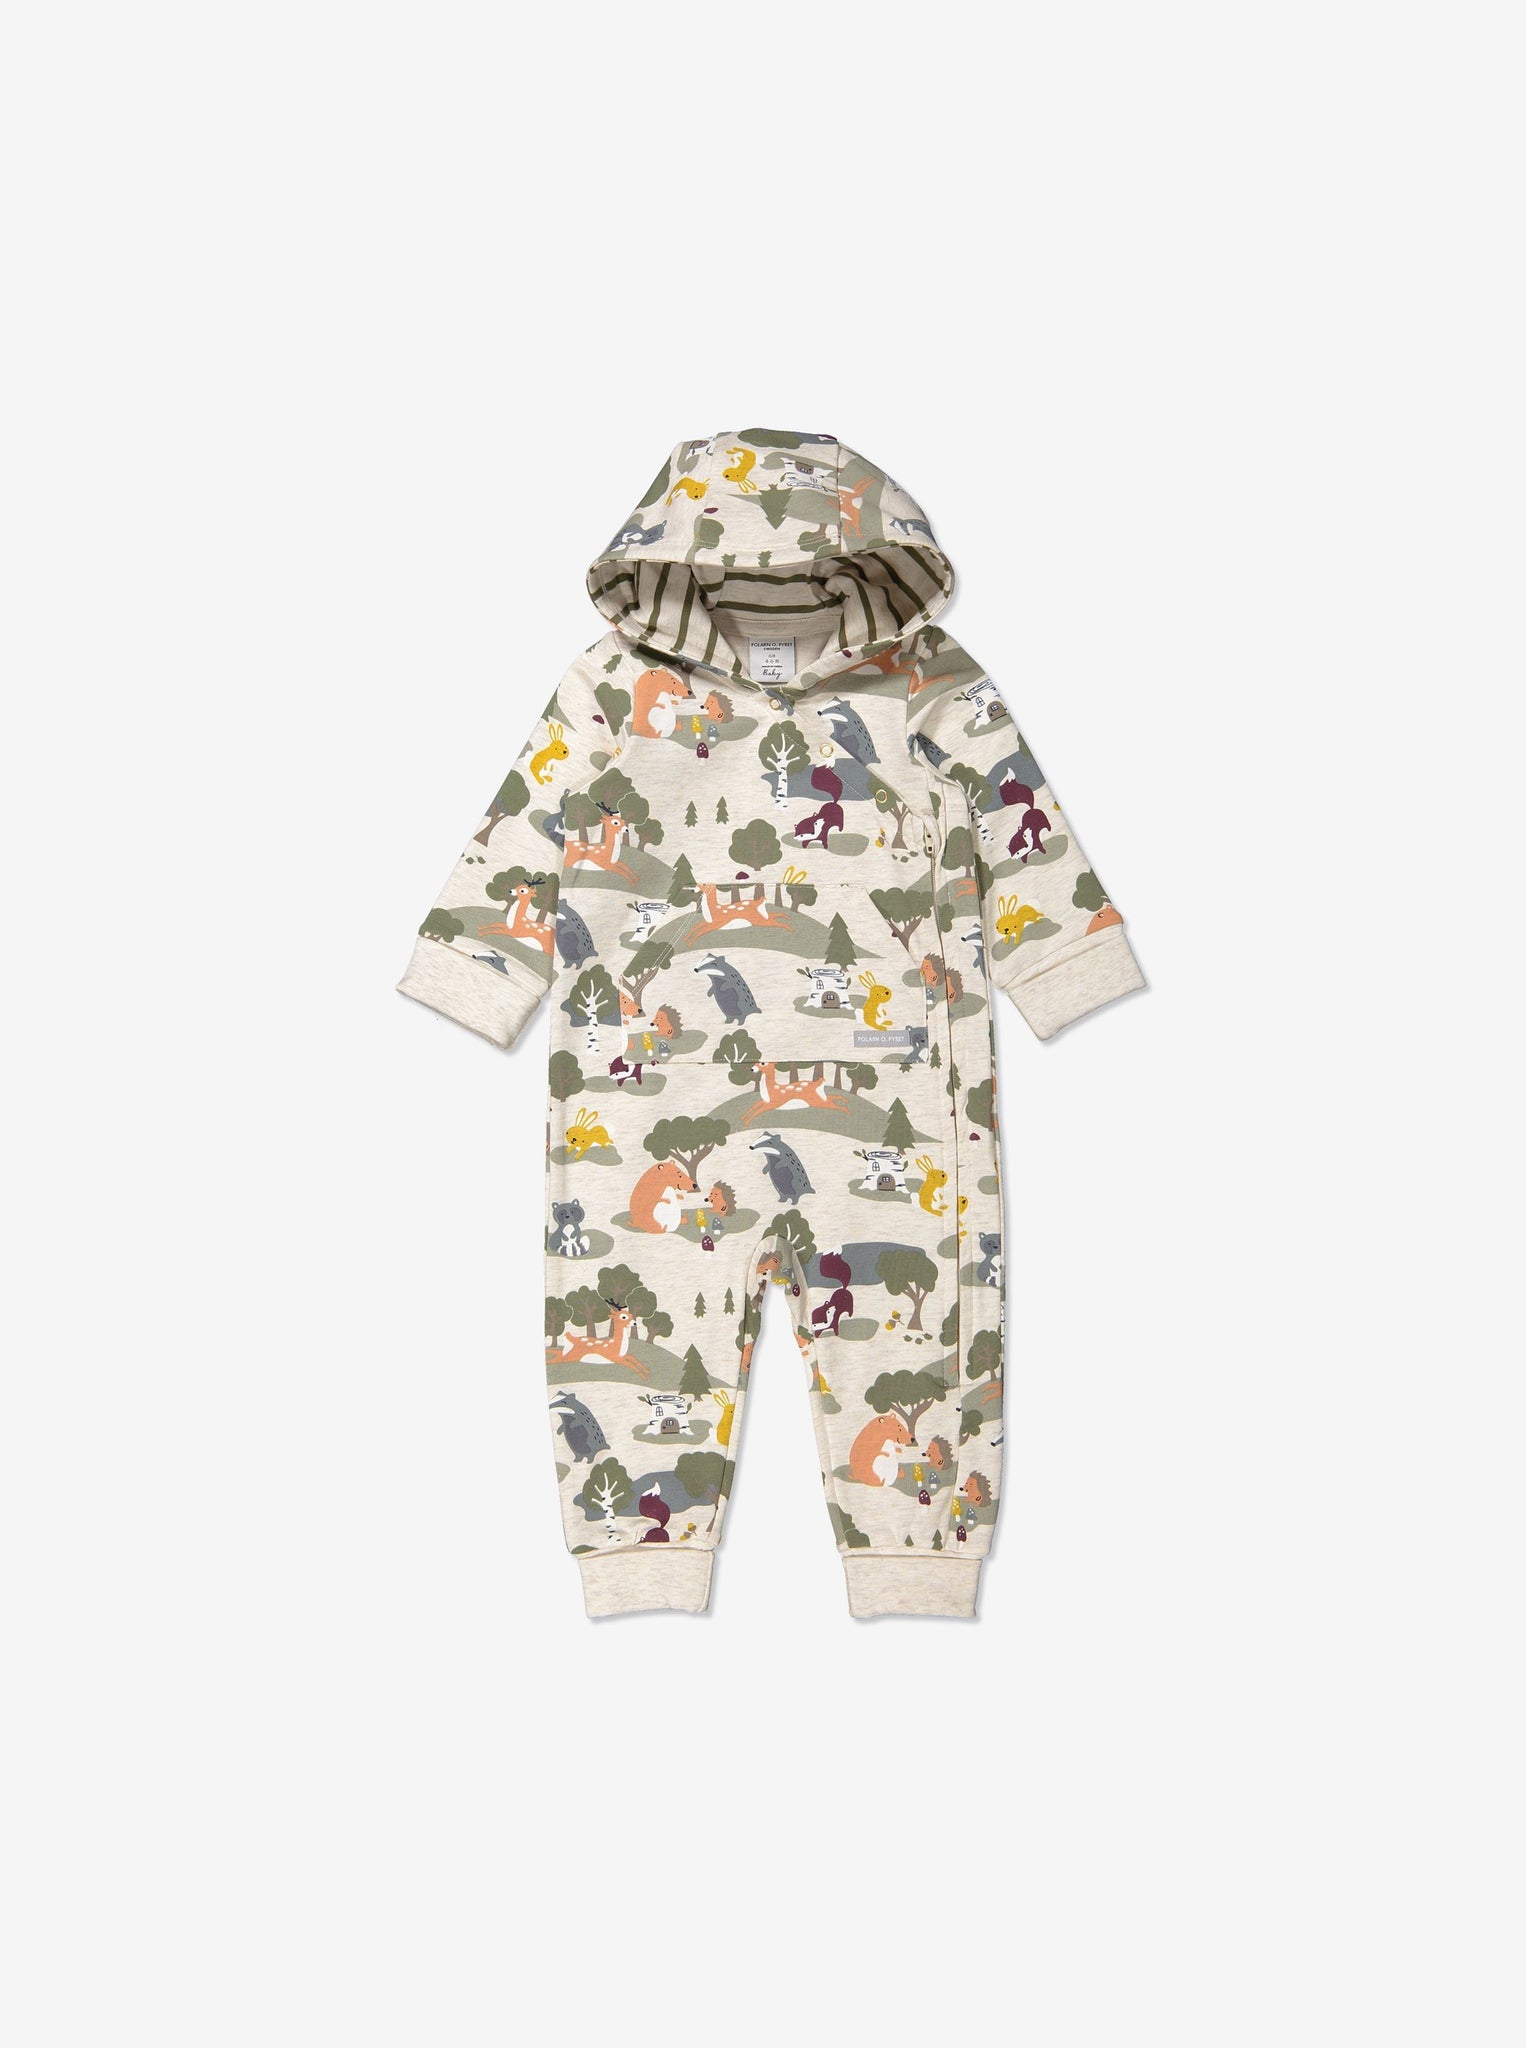 White hooded animal print baby romper for babies 1-12 months old with front pouch pocket. Made with soft organic cotton.